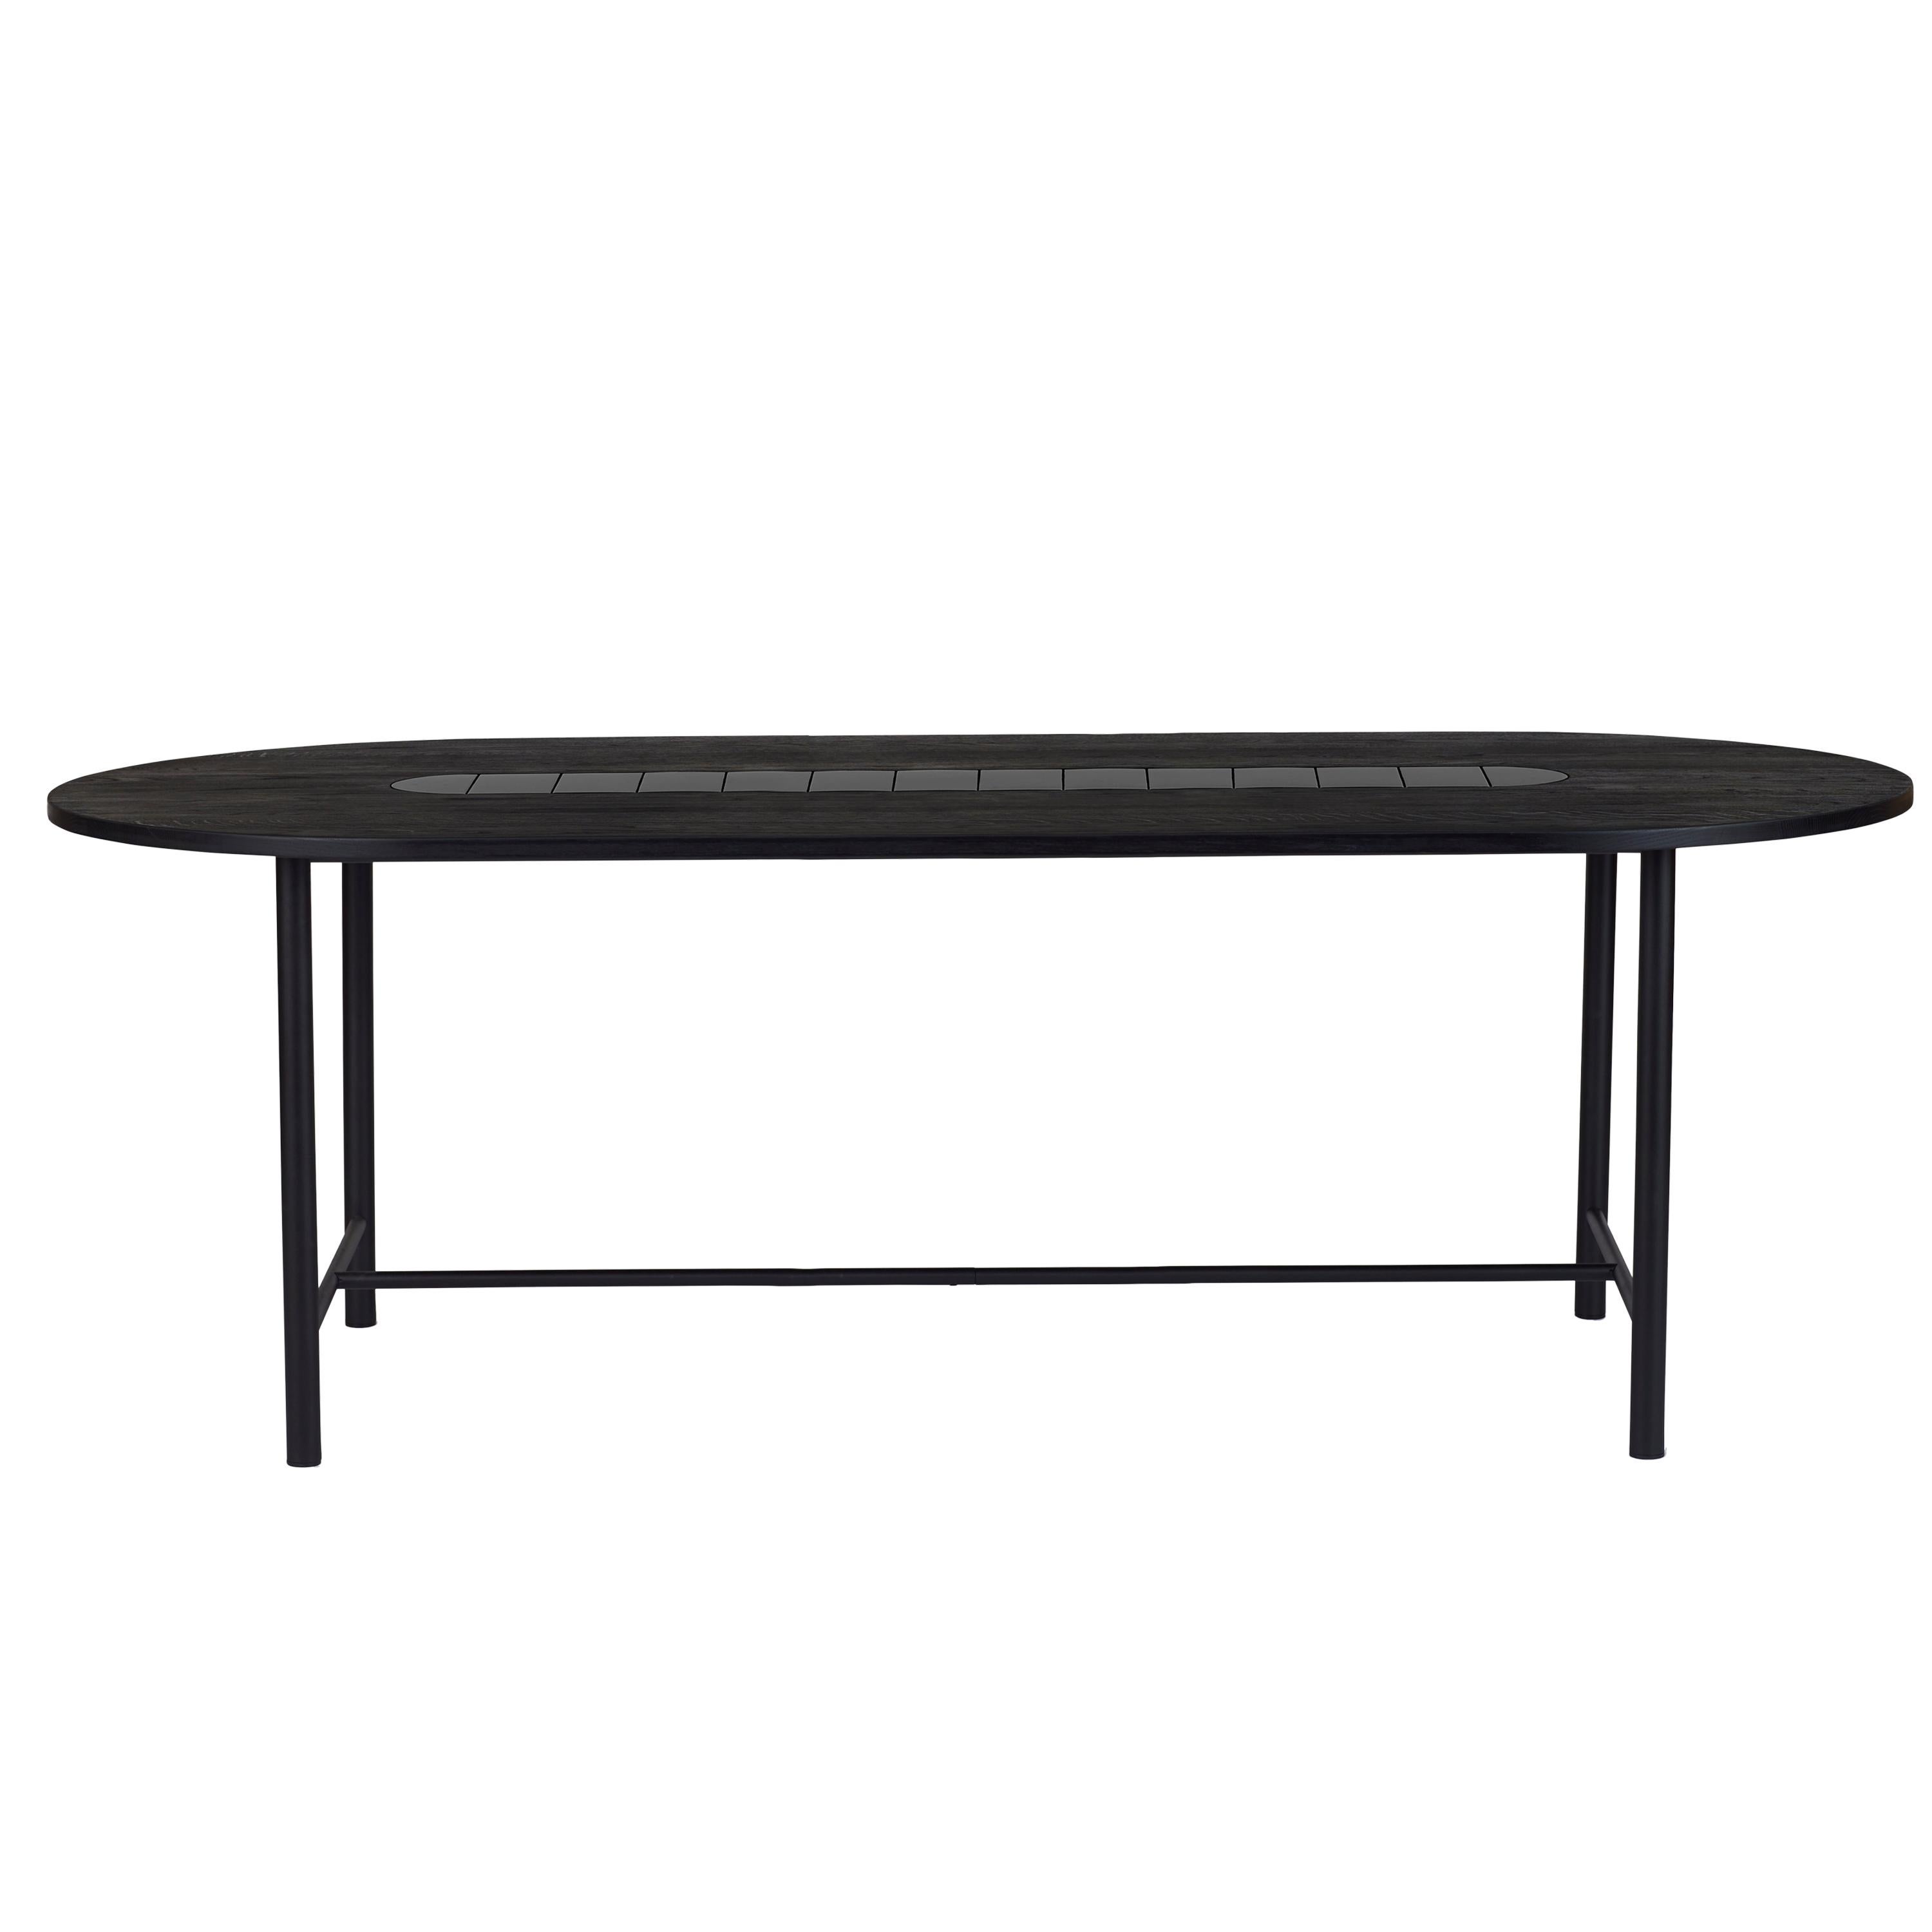 For Sale: Black (Soft black) Be My Guest Large Dining Table, by Charlotte Høncke from Warm Nordic